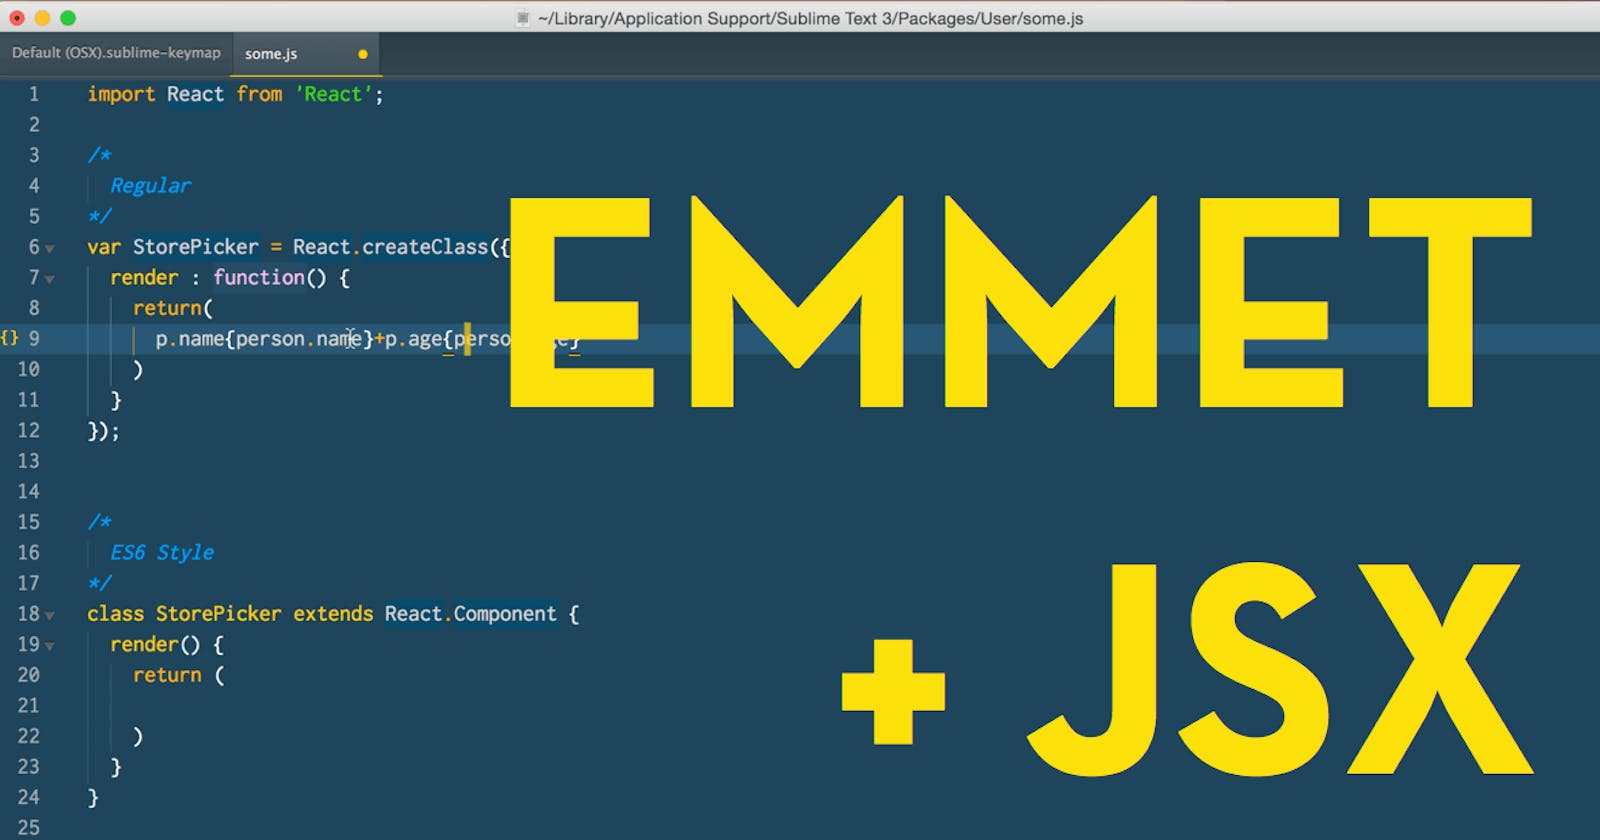 Emmet expansions and className in React JSX